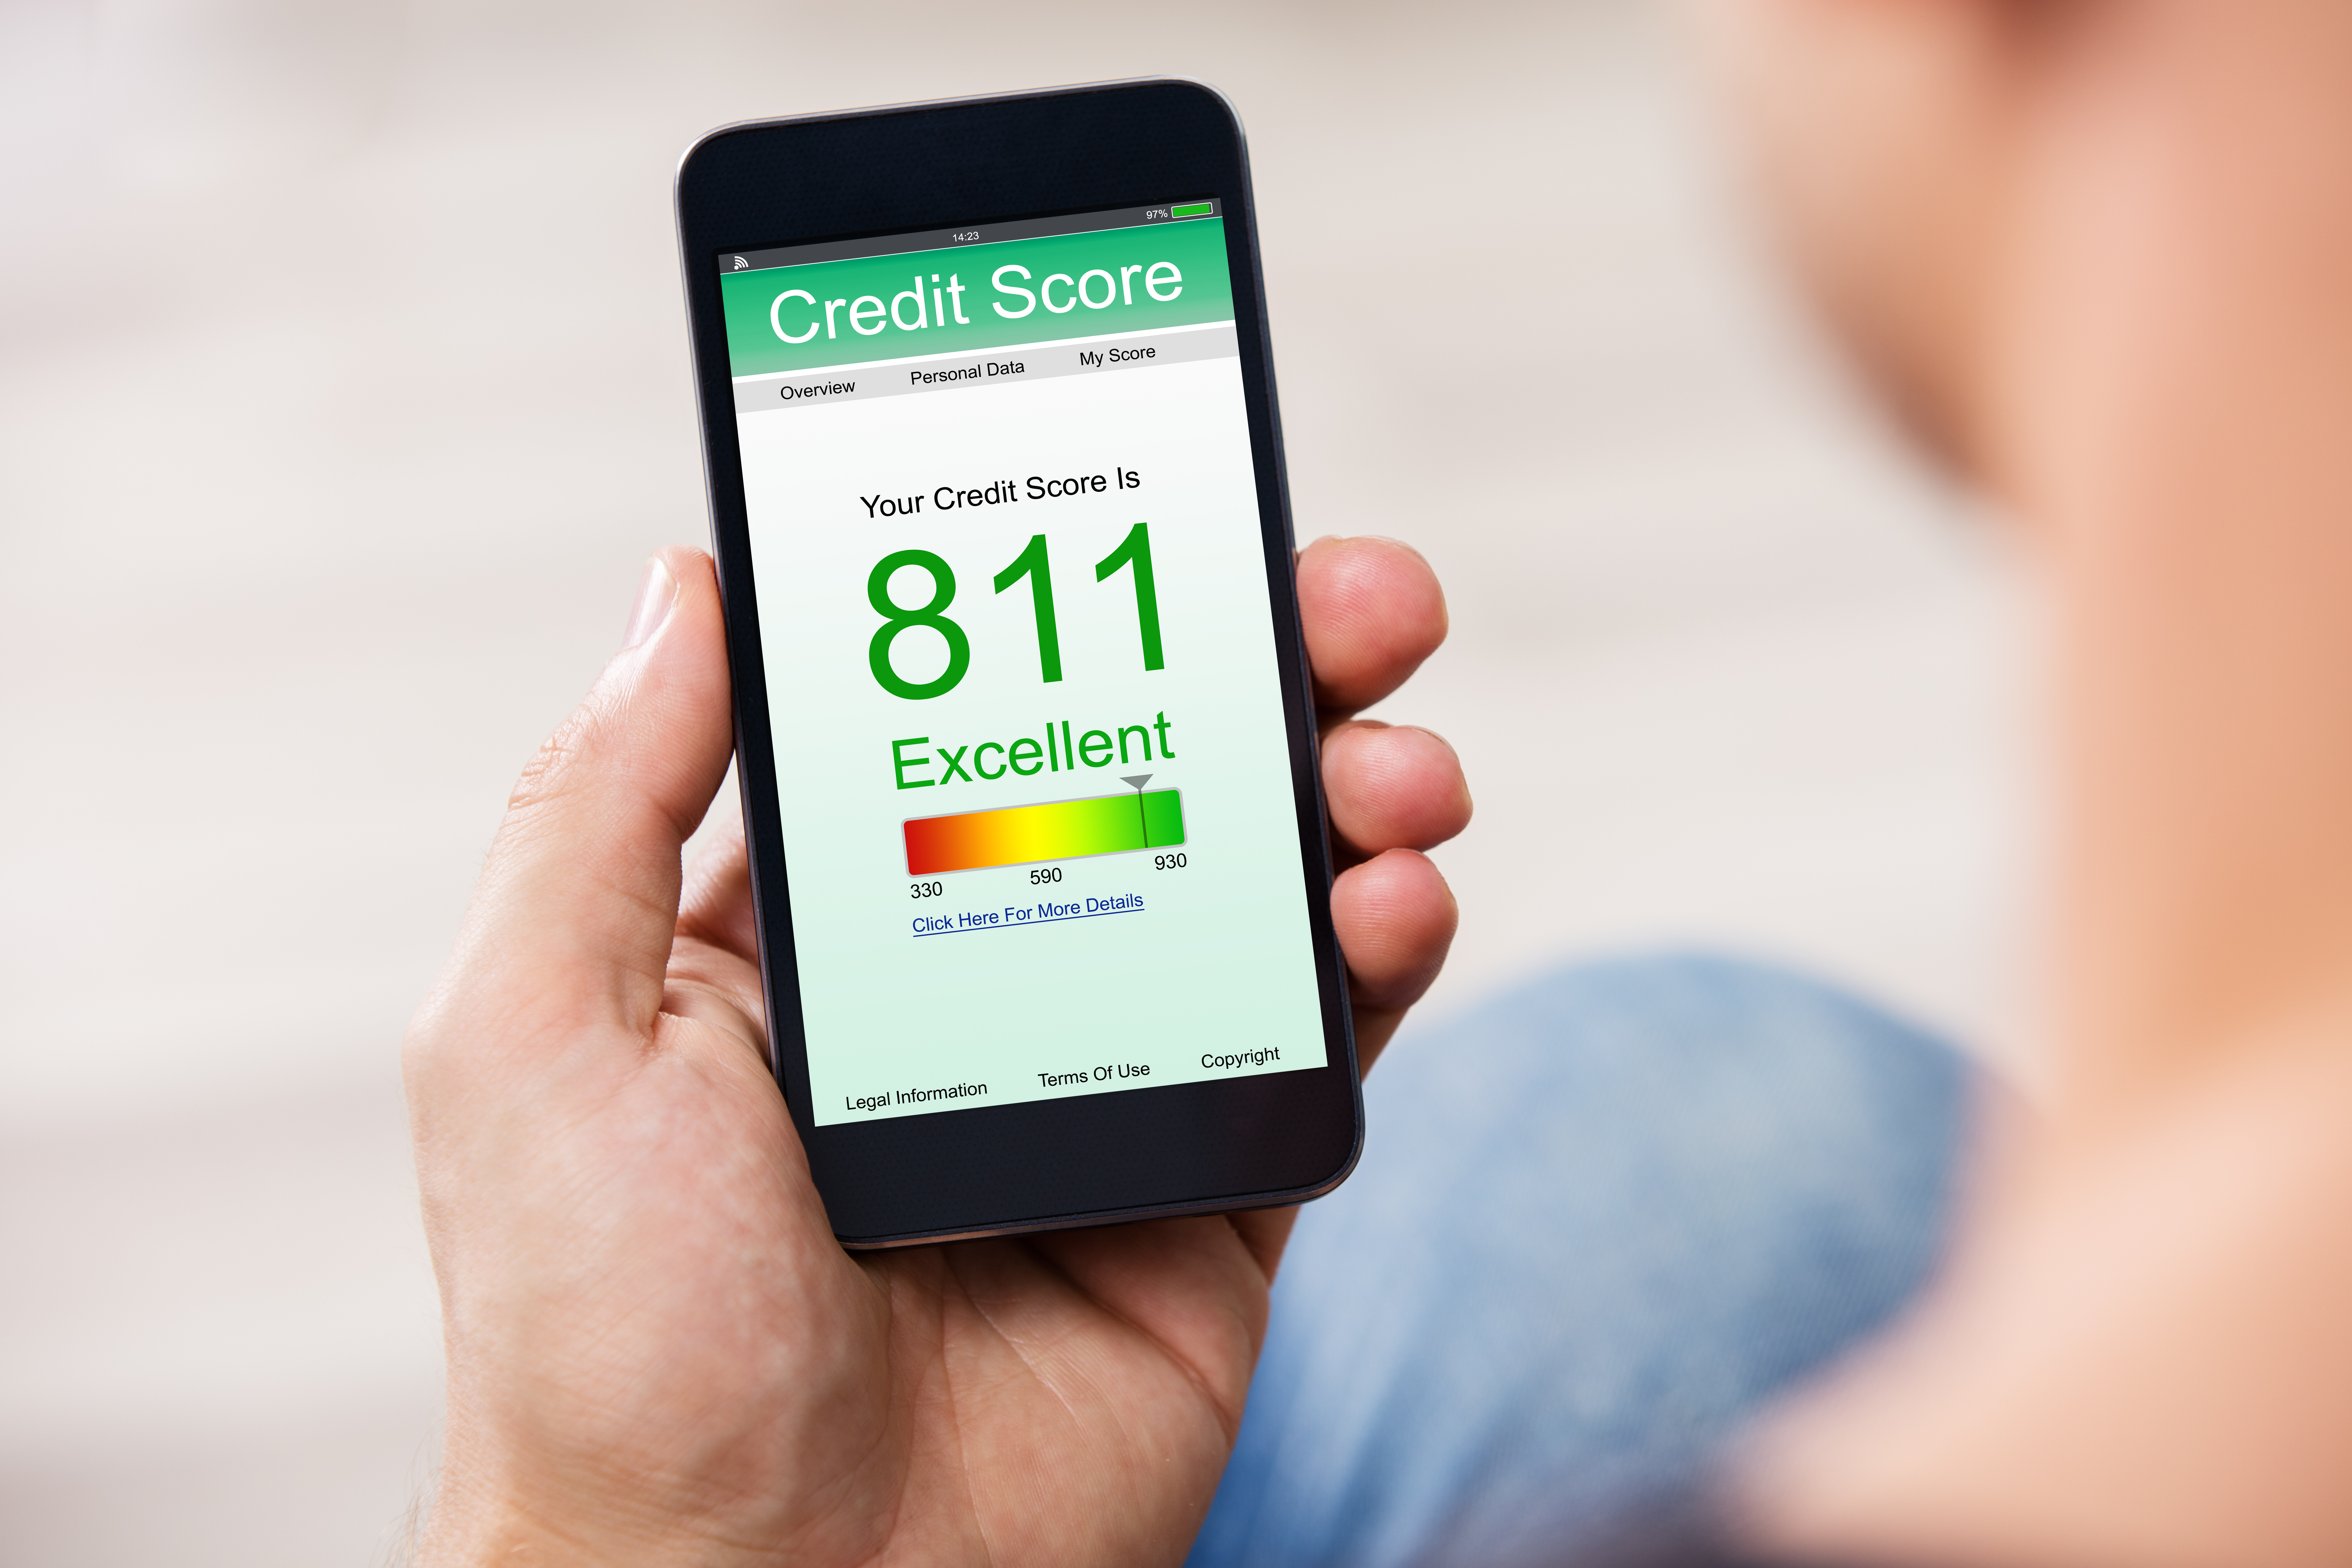 Once saving up for your deposit is well underway, it’s time to check your credit score